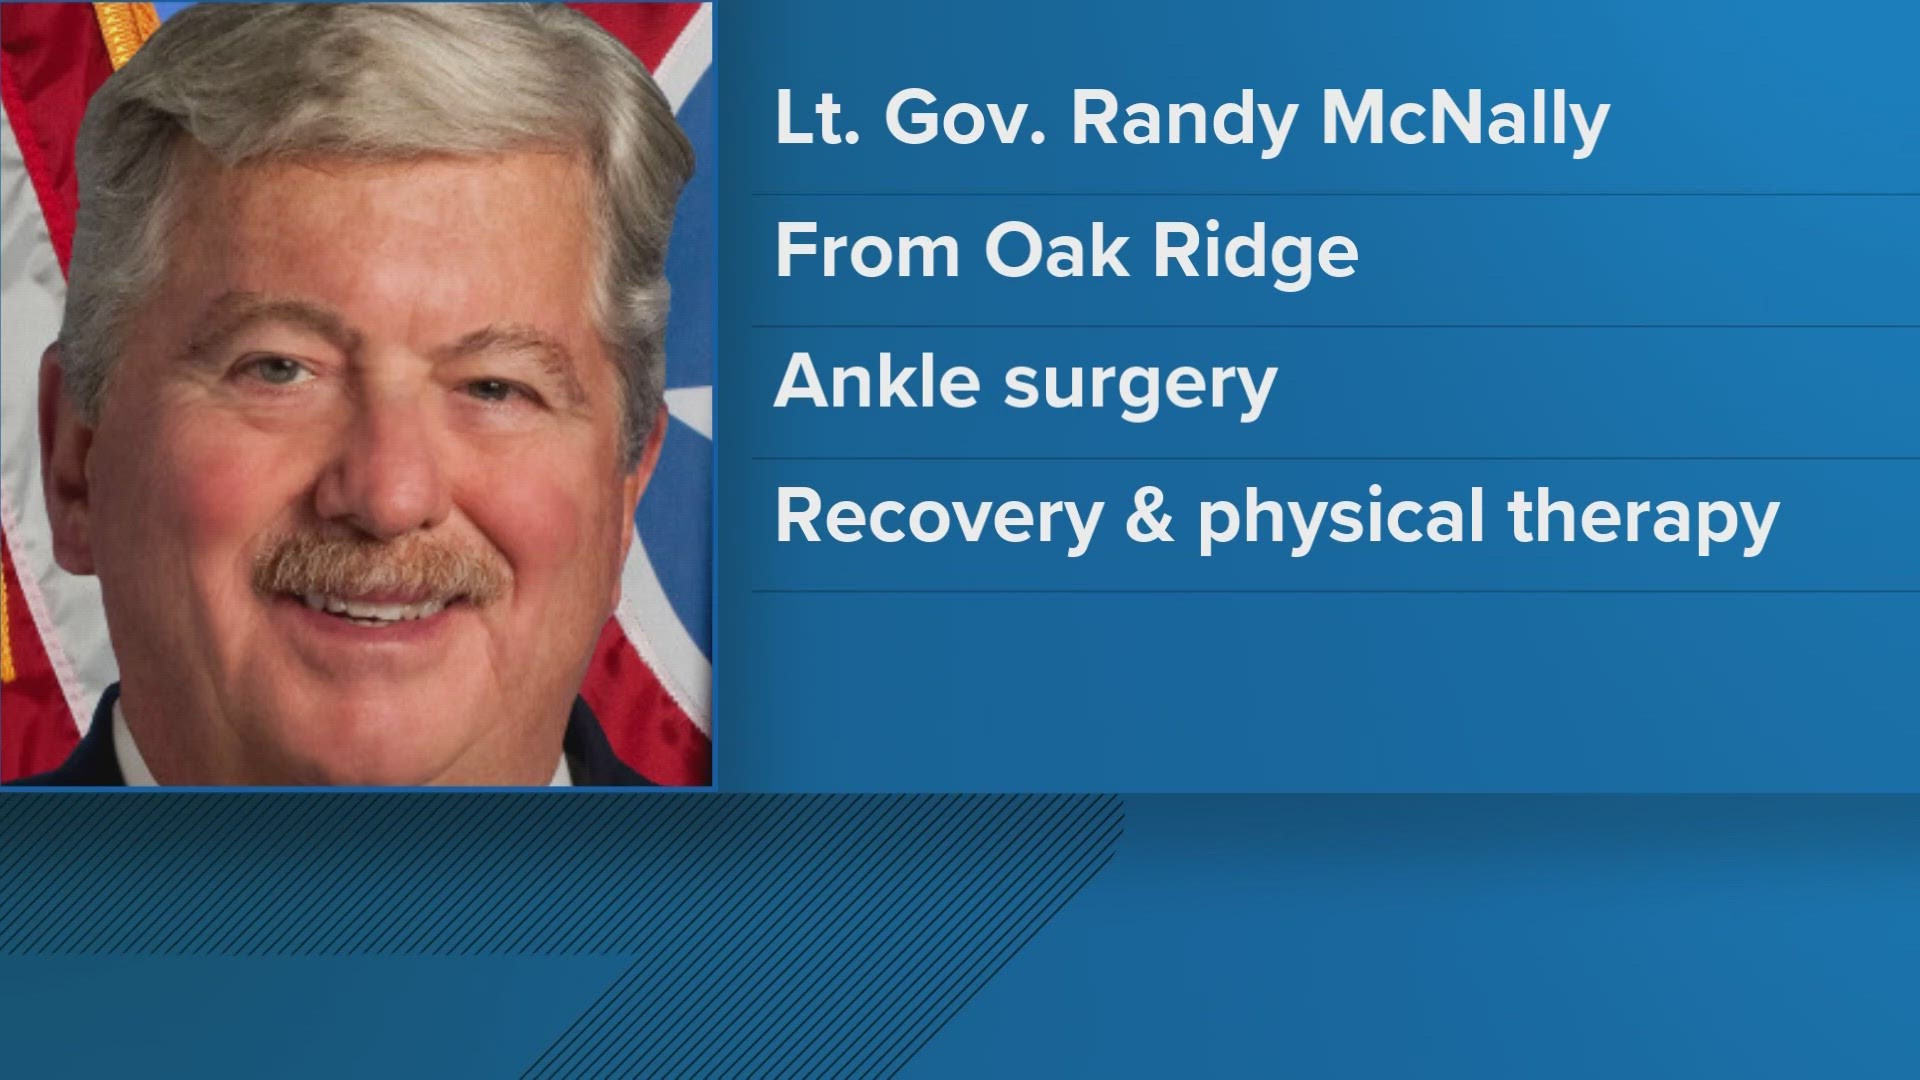 Lieutenant Governor Randy McNally will miss the opening of the Legislative Session. The Republican from Oak Ridge is recovering from ankle surgery.